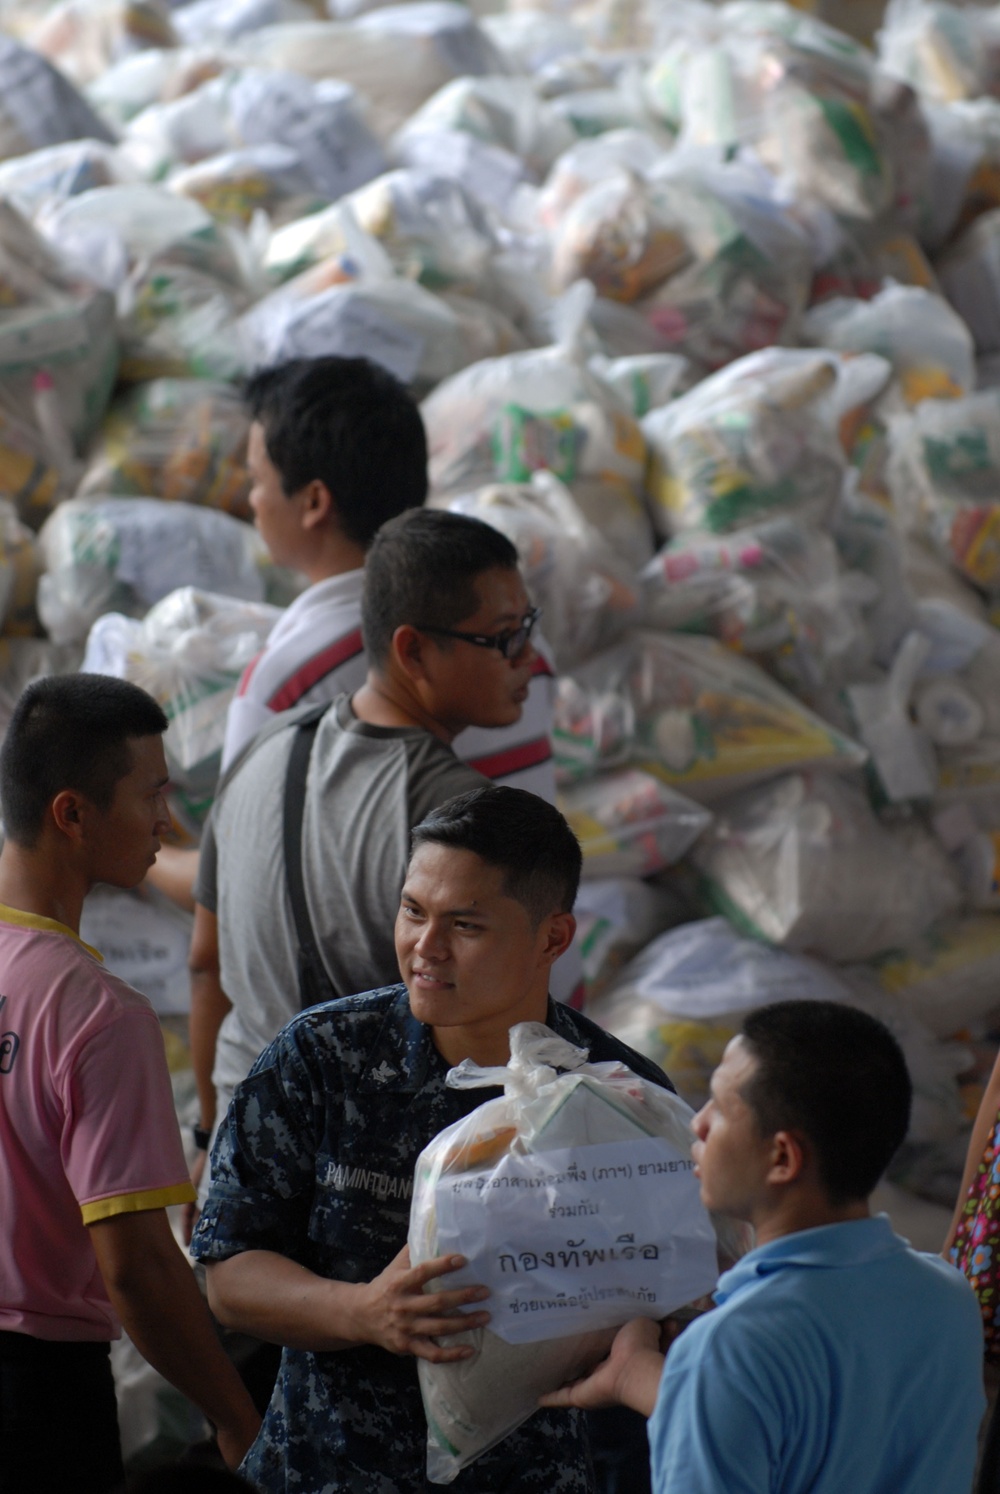 USS Mustin provides post-flood relief in Thailand